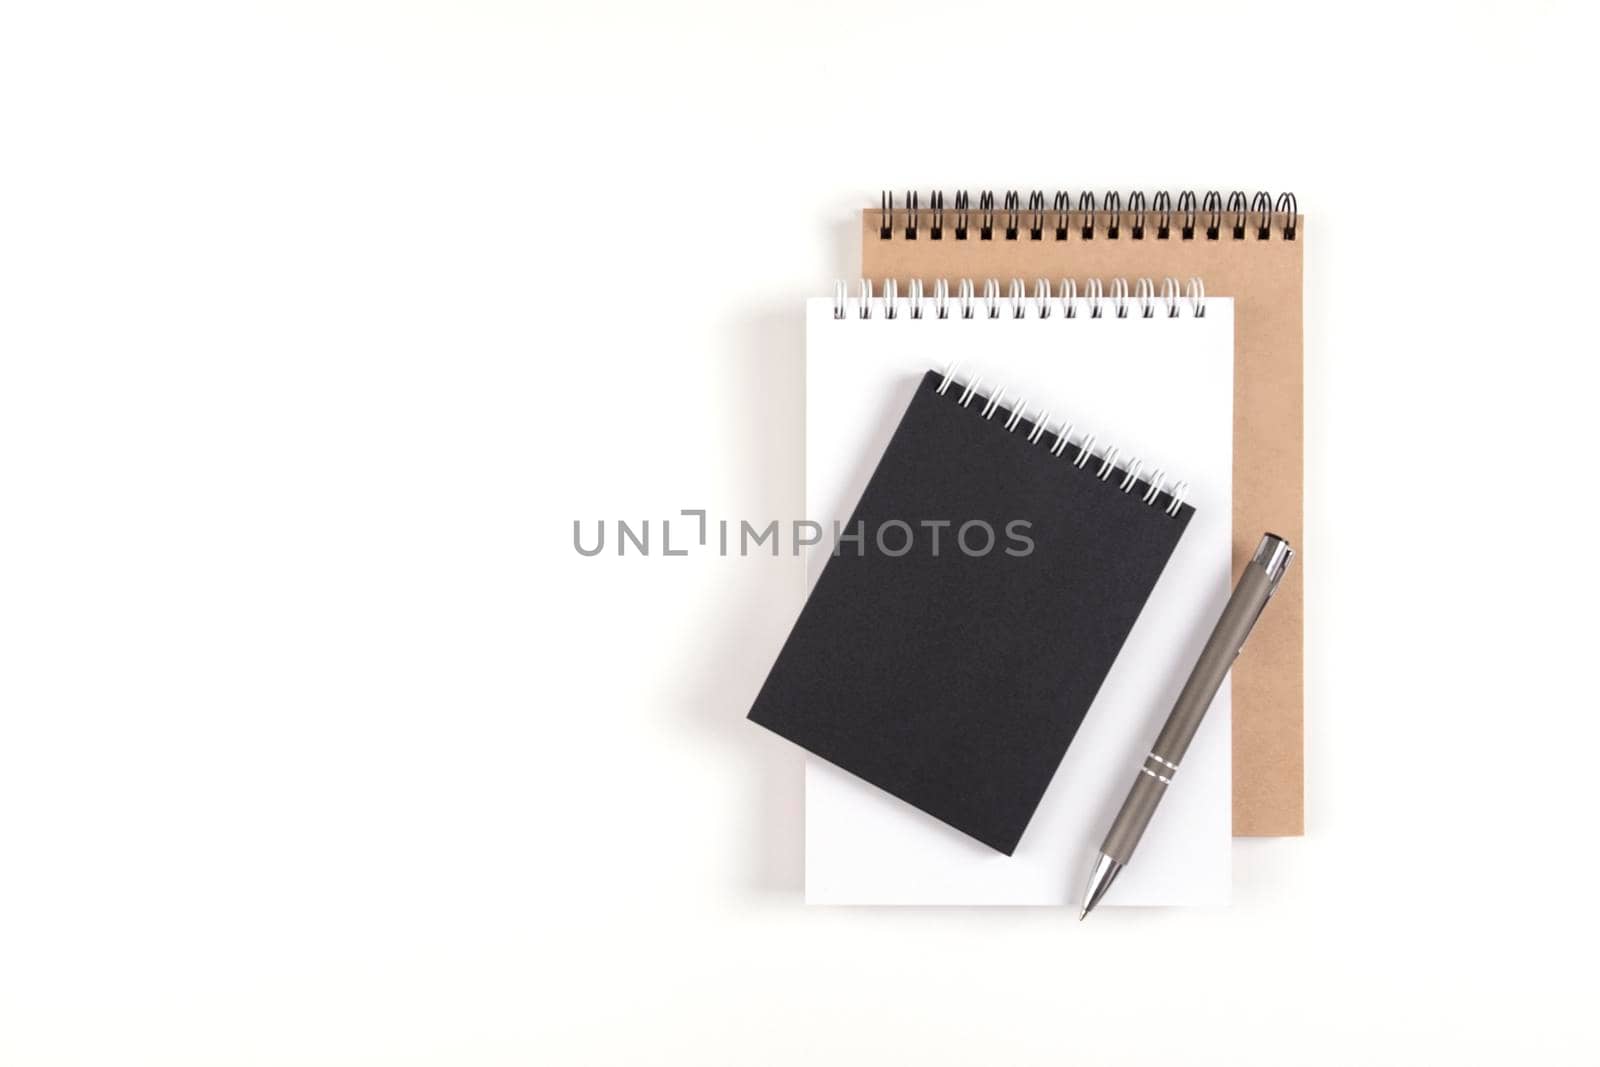 Three blank notepads on a spiral stacked in a stack on a white background. Notebooks with white, black and recycled sheets and pen. Education, office.